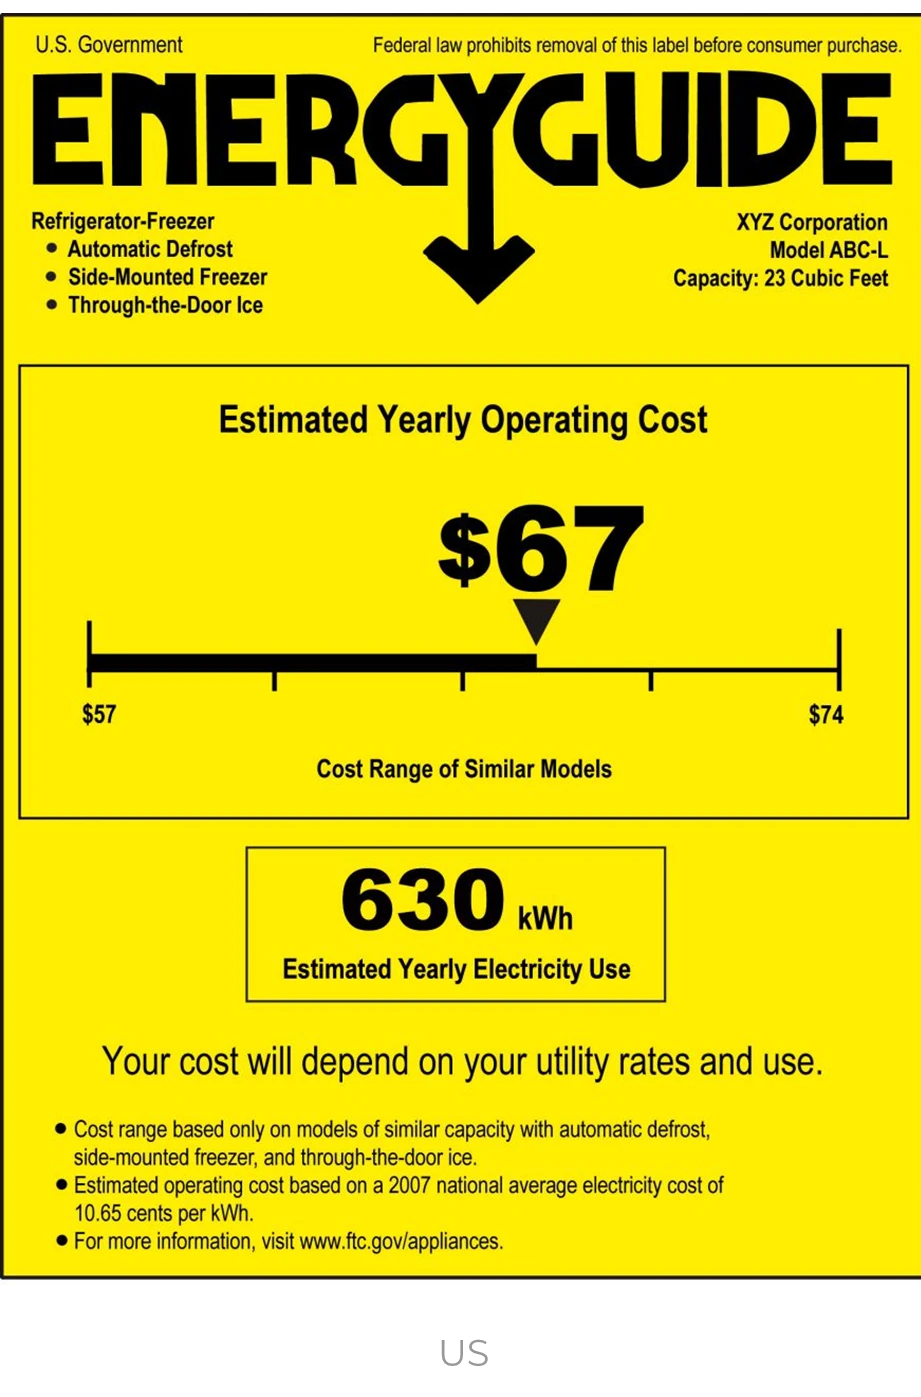 Example of how an energy label looks like in the US EnergyGuide program